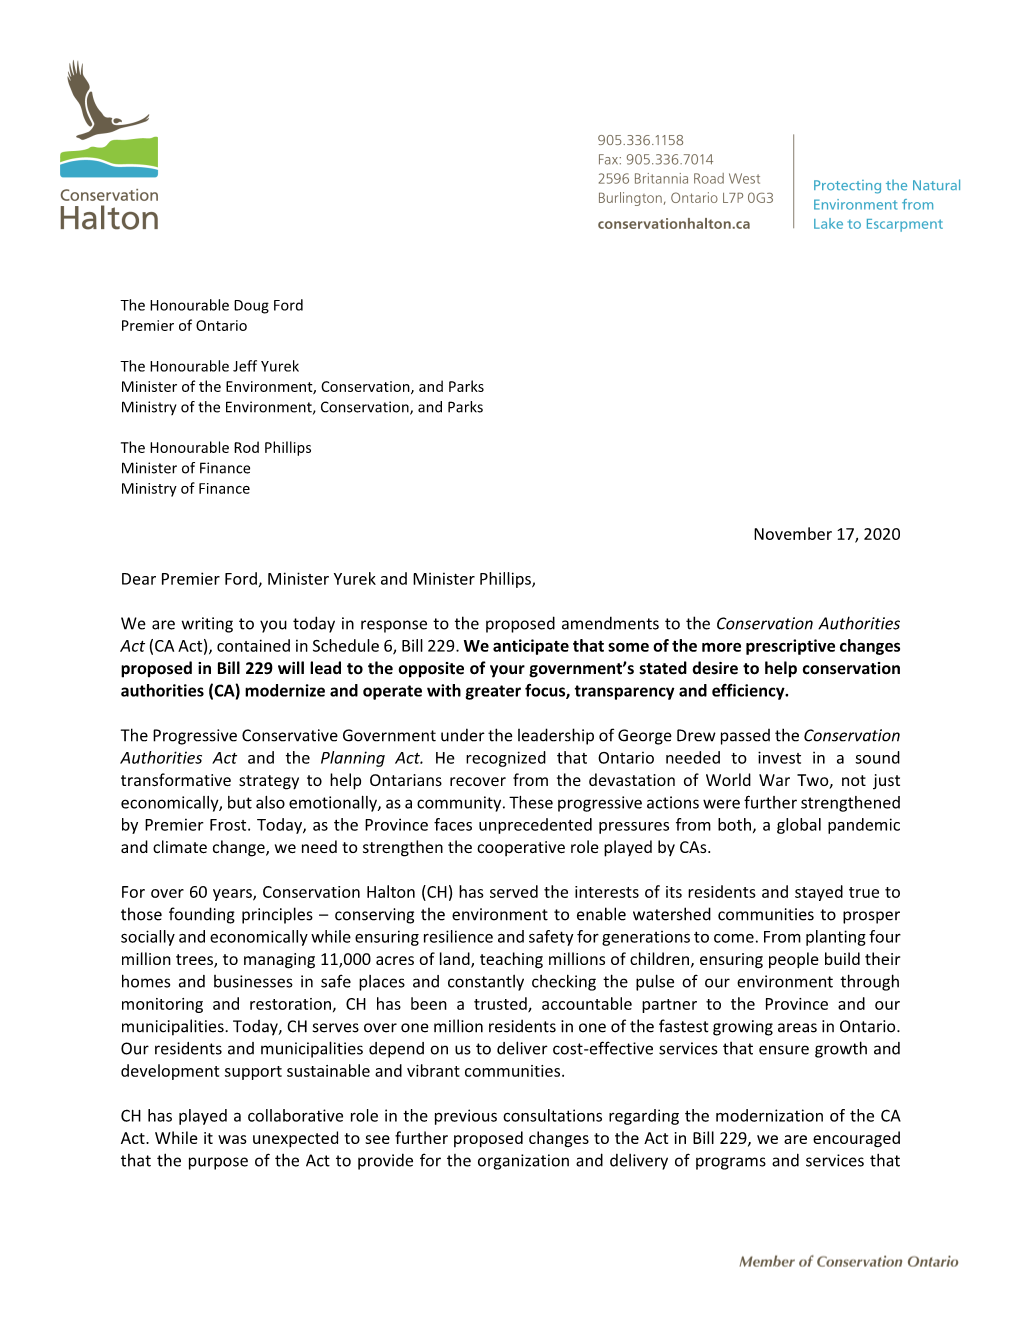 CH Letter to Ontario Premier 16 11 2020.Pdf